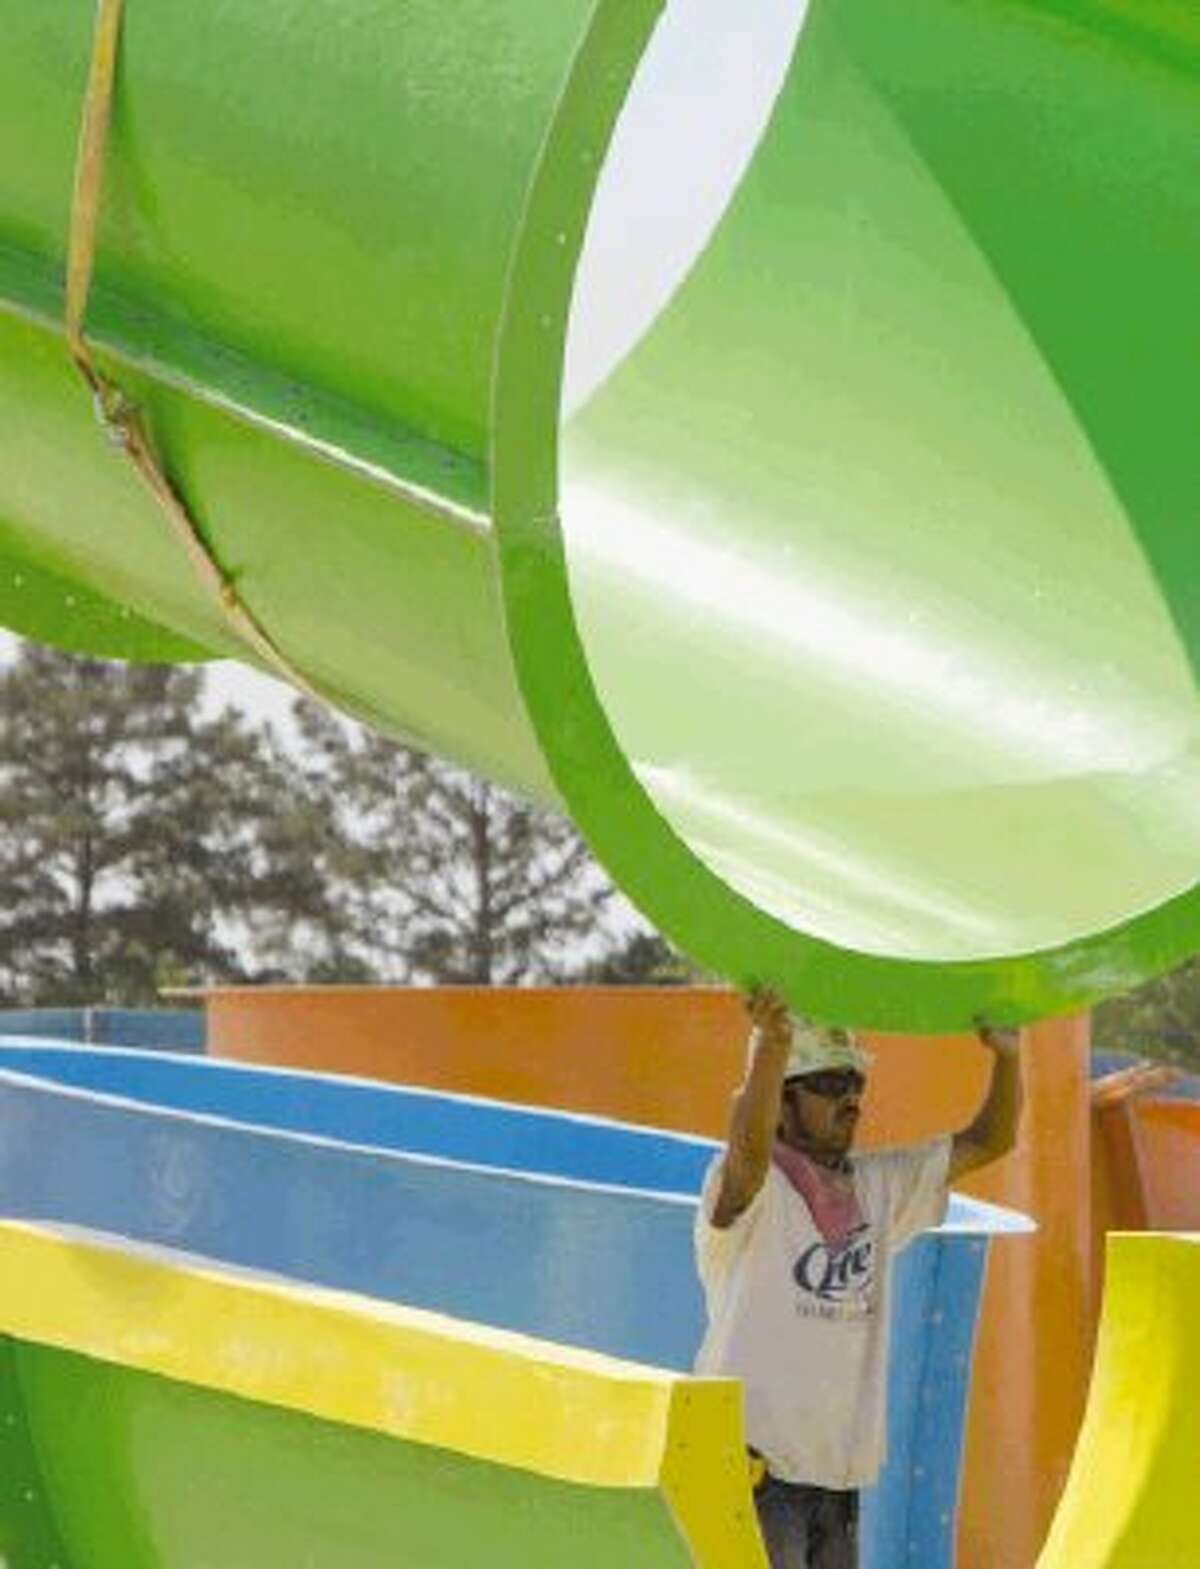 Construction crews work on putting together the Big Kahuna, a new water slide, at Wet ‘n’ Wild SplashTown in Spring Monday. The water park recently went through a multi-million dollar makeover and will have an unveiling Friday.